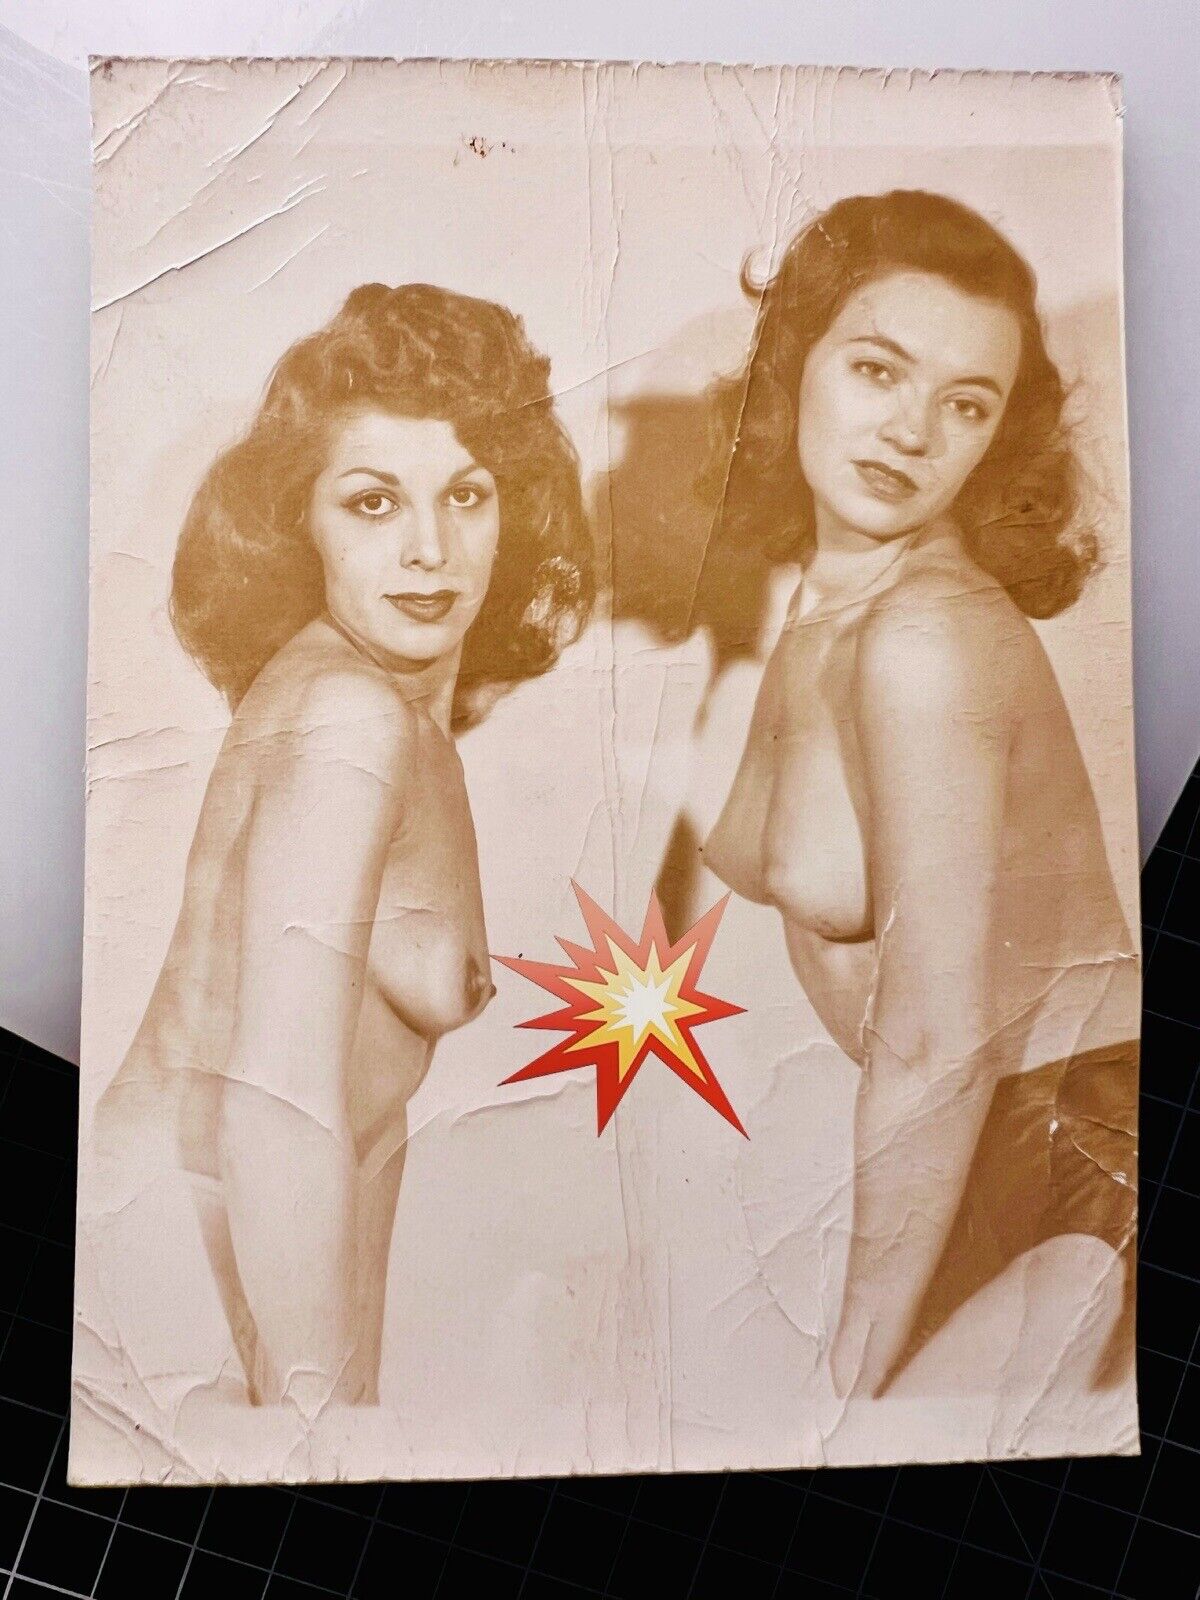 Vtg Original 50\'s June King & Friend Risque Cheesecake Pinup Glamour Busty Photo